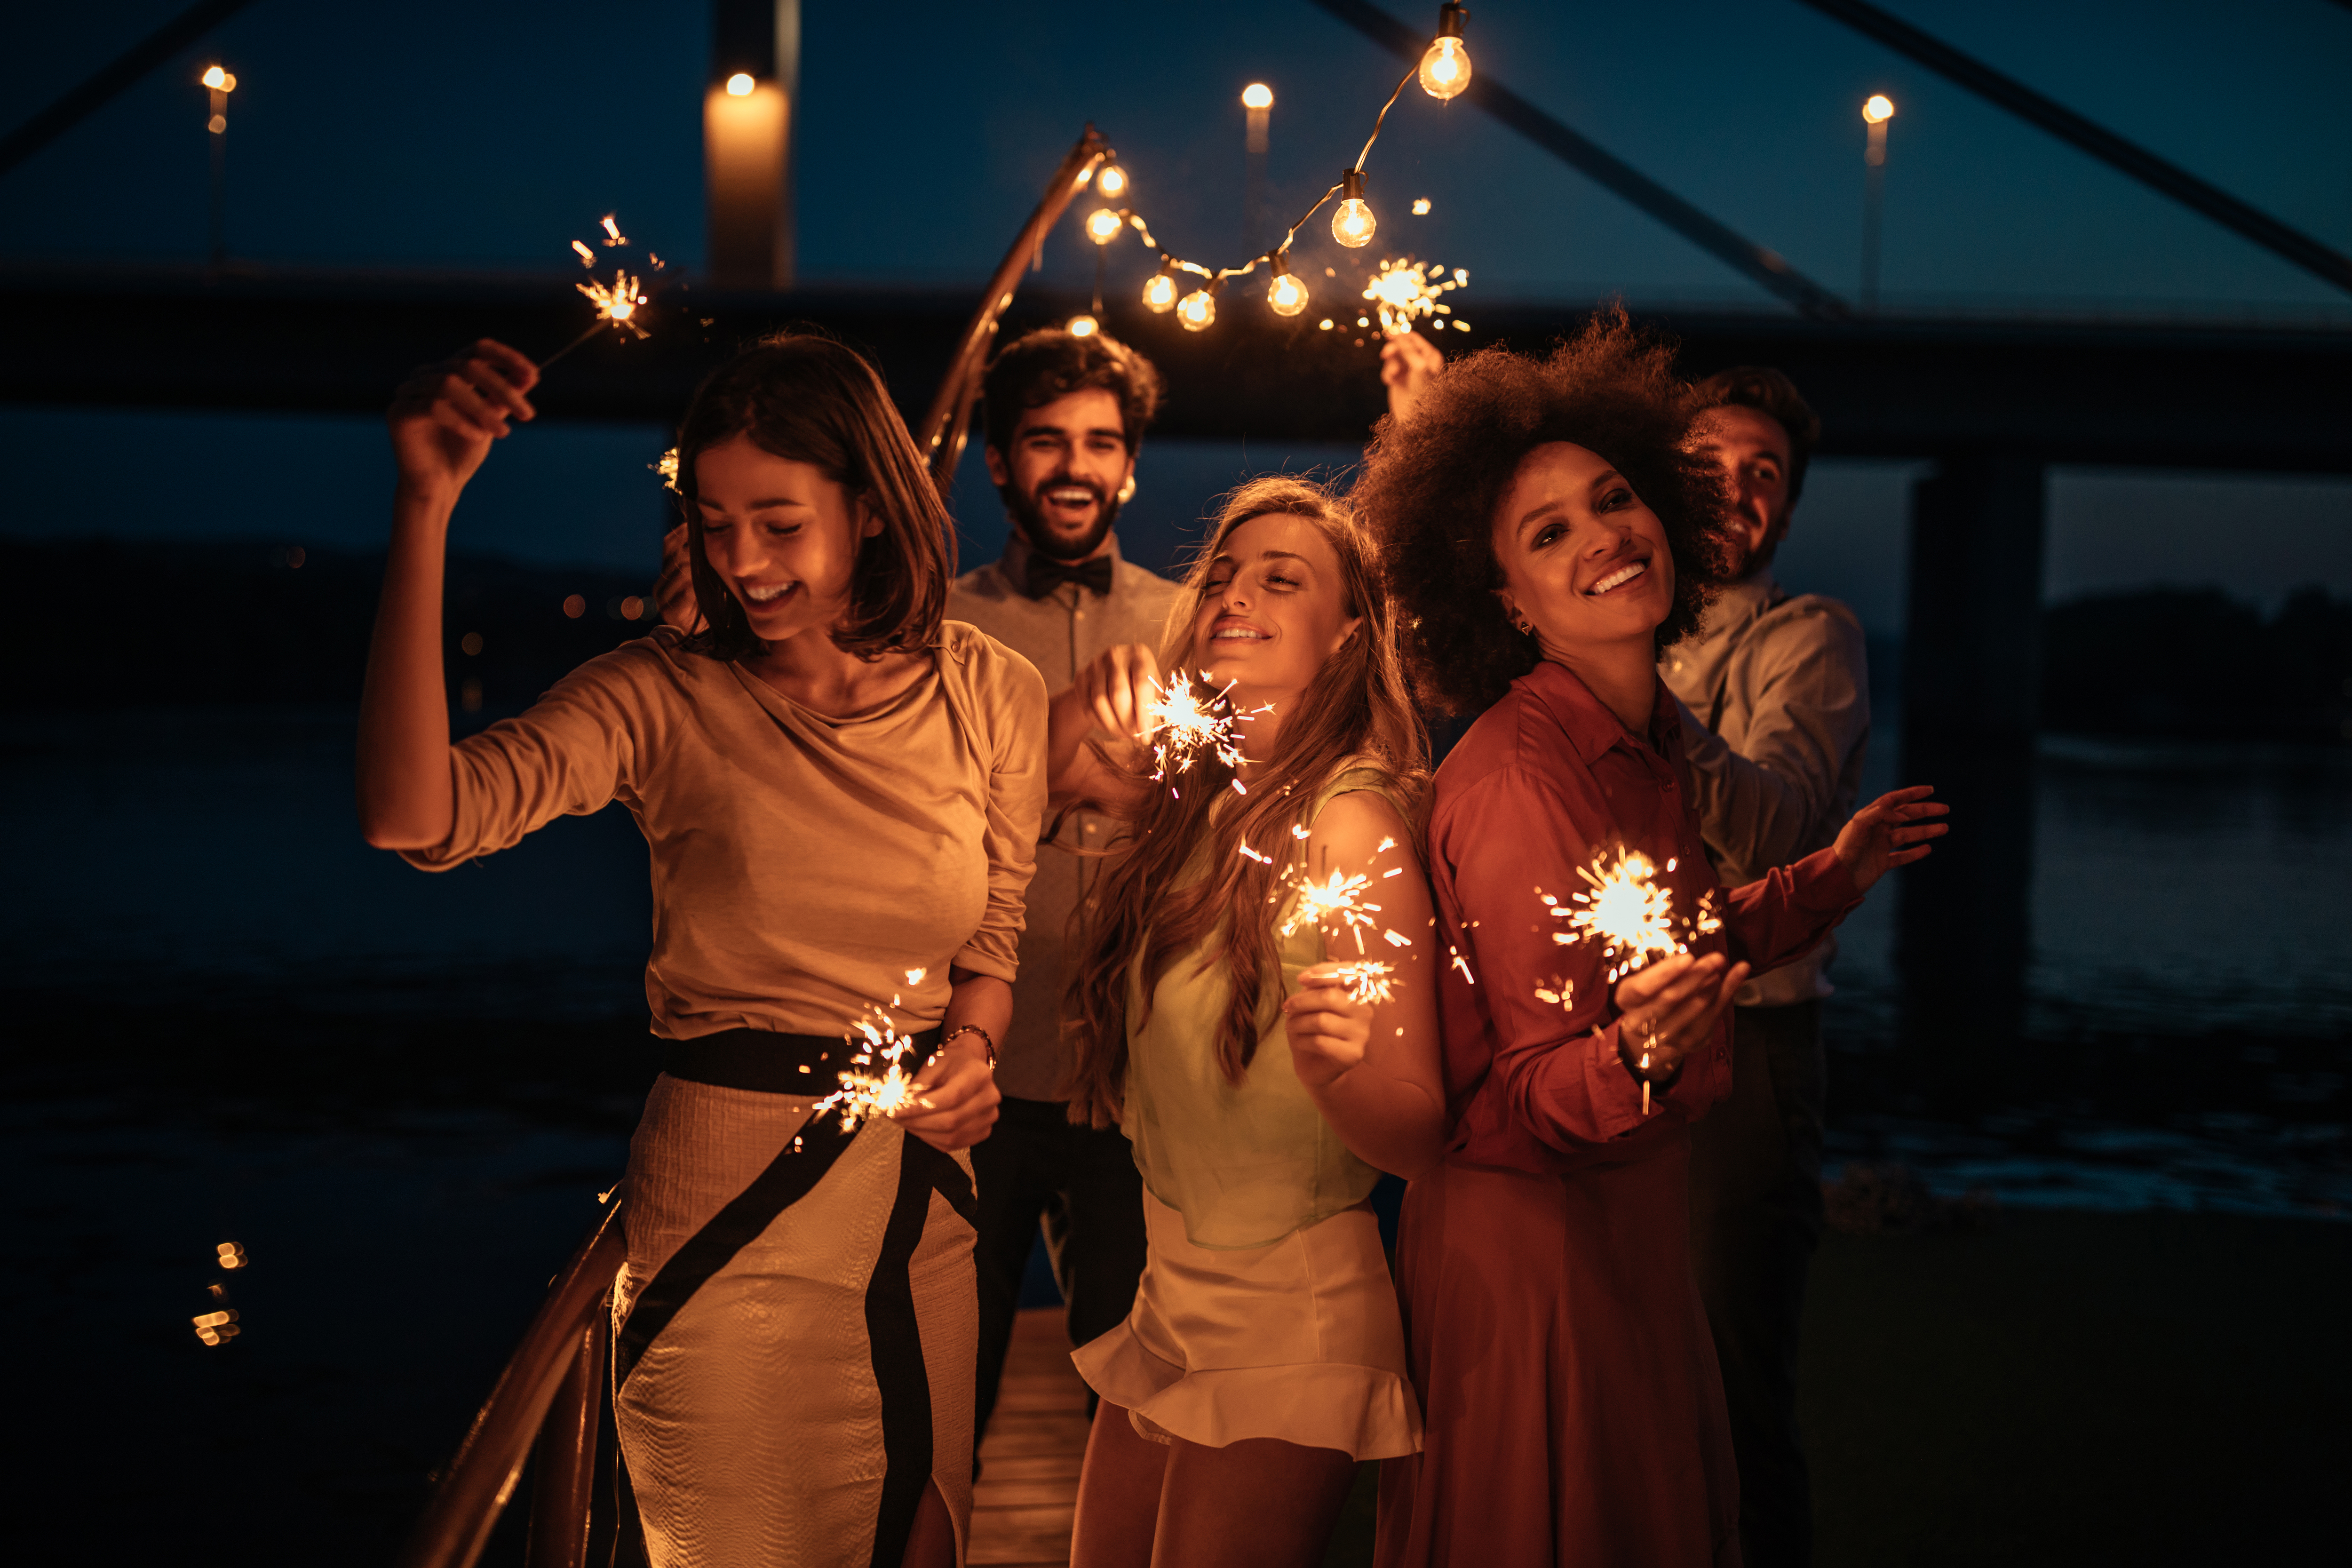 Group of people celebrating with sparklers in backyard